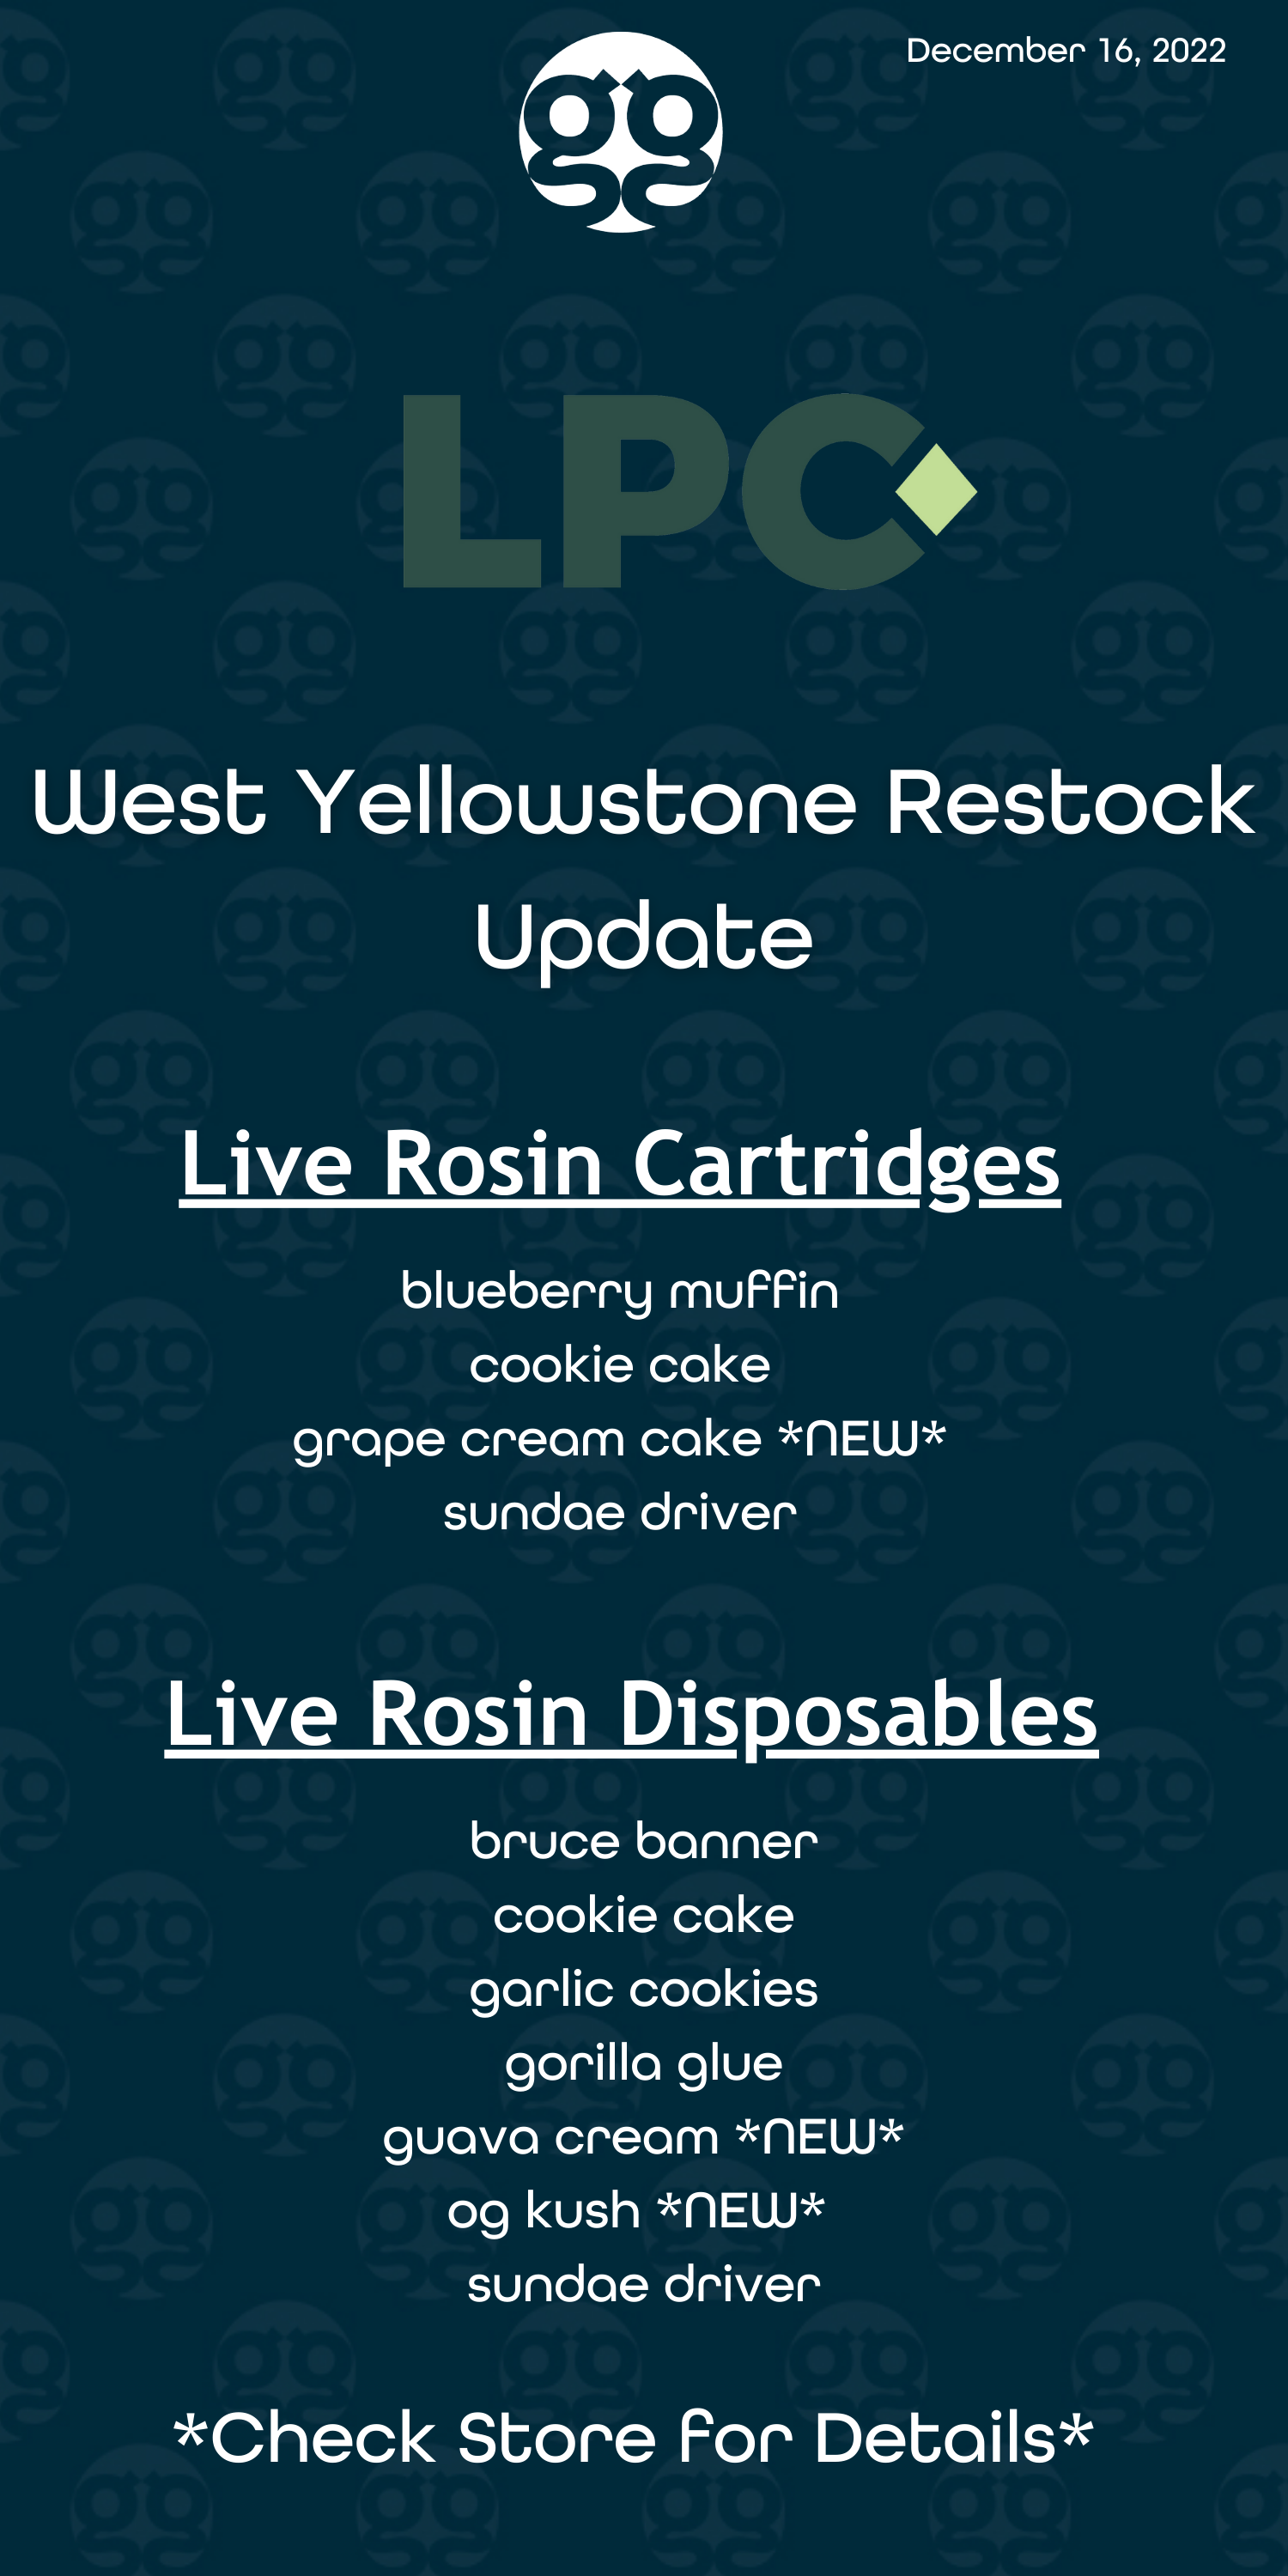 https://groovesolventless.com/wp-content/uploads/2022/12/West-Yellowstone-Update-1.png